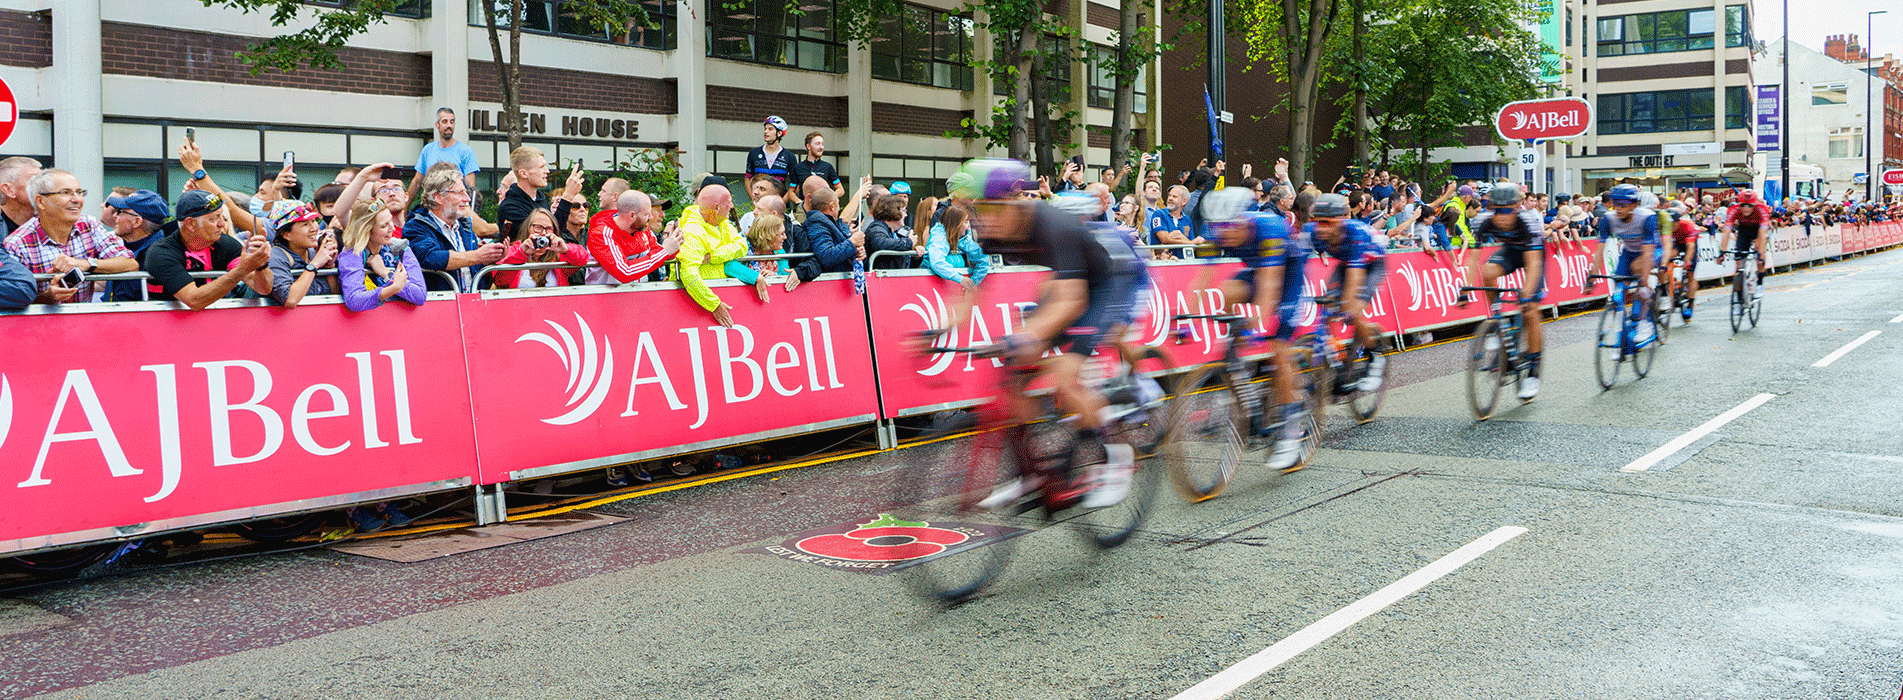 Barriers In Situ At Cycling Event Infront Of A Crowd